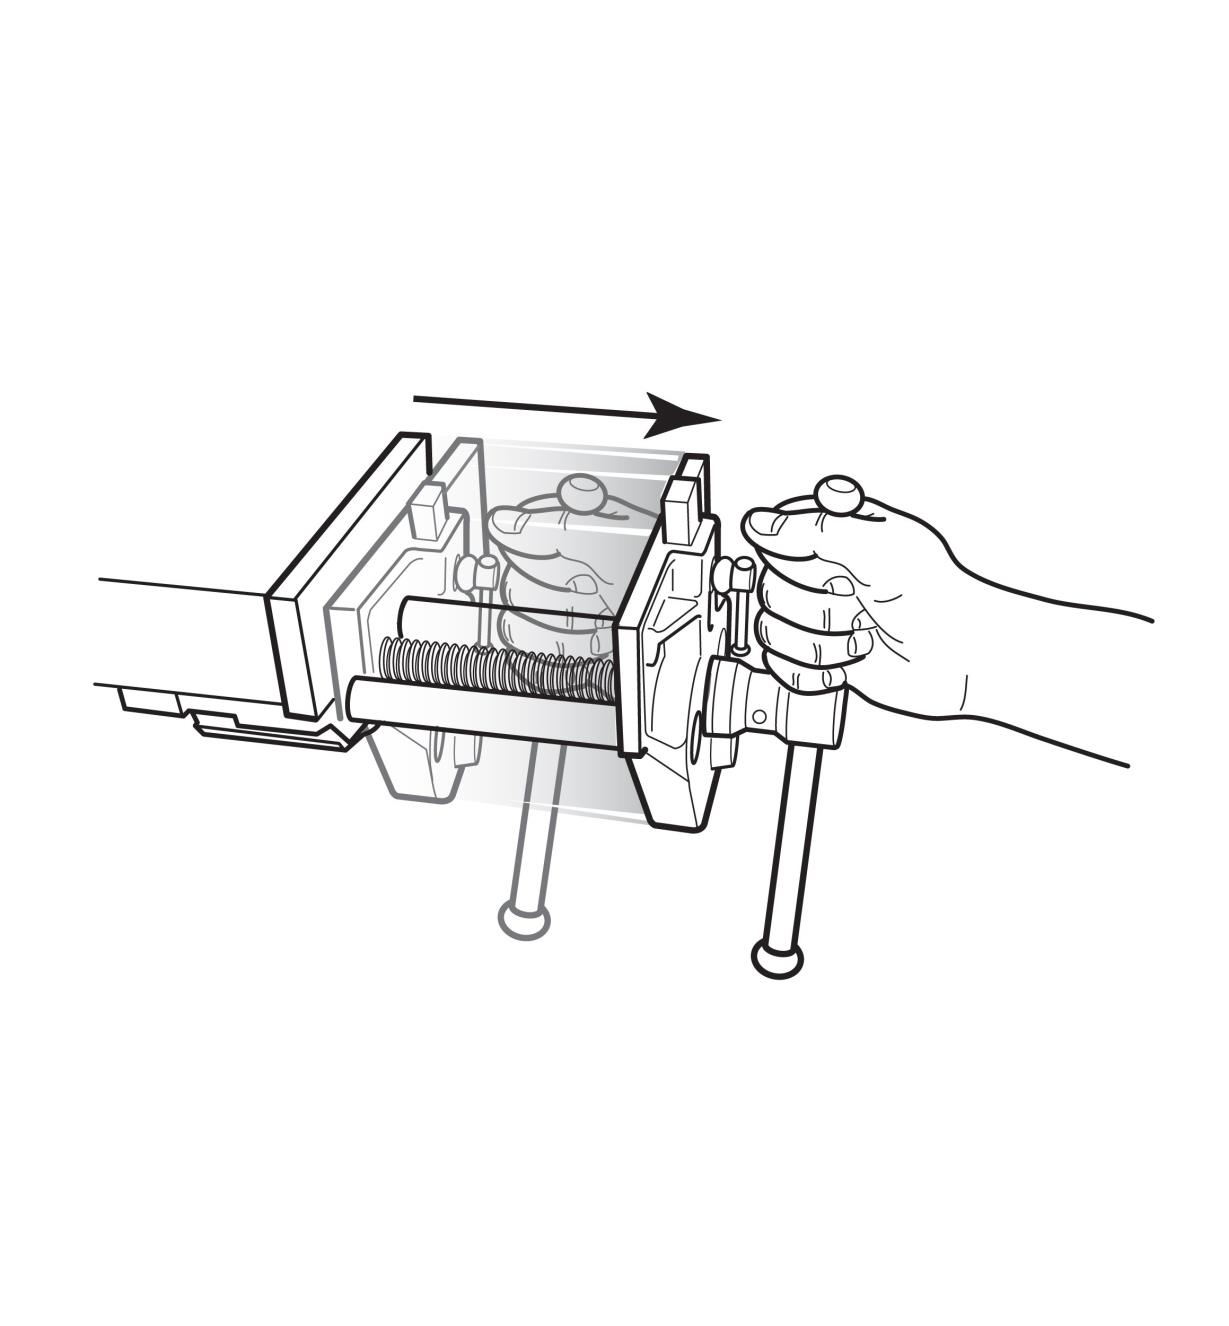 Illustration shows how the vise releases